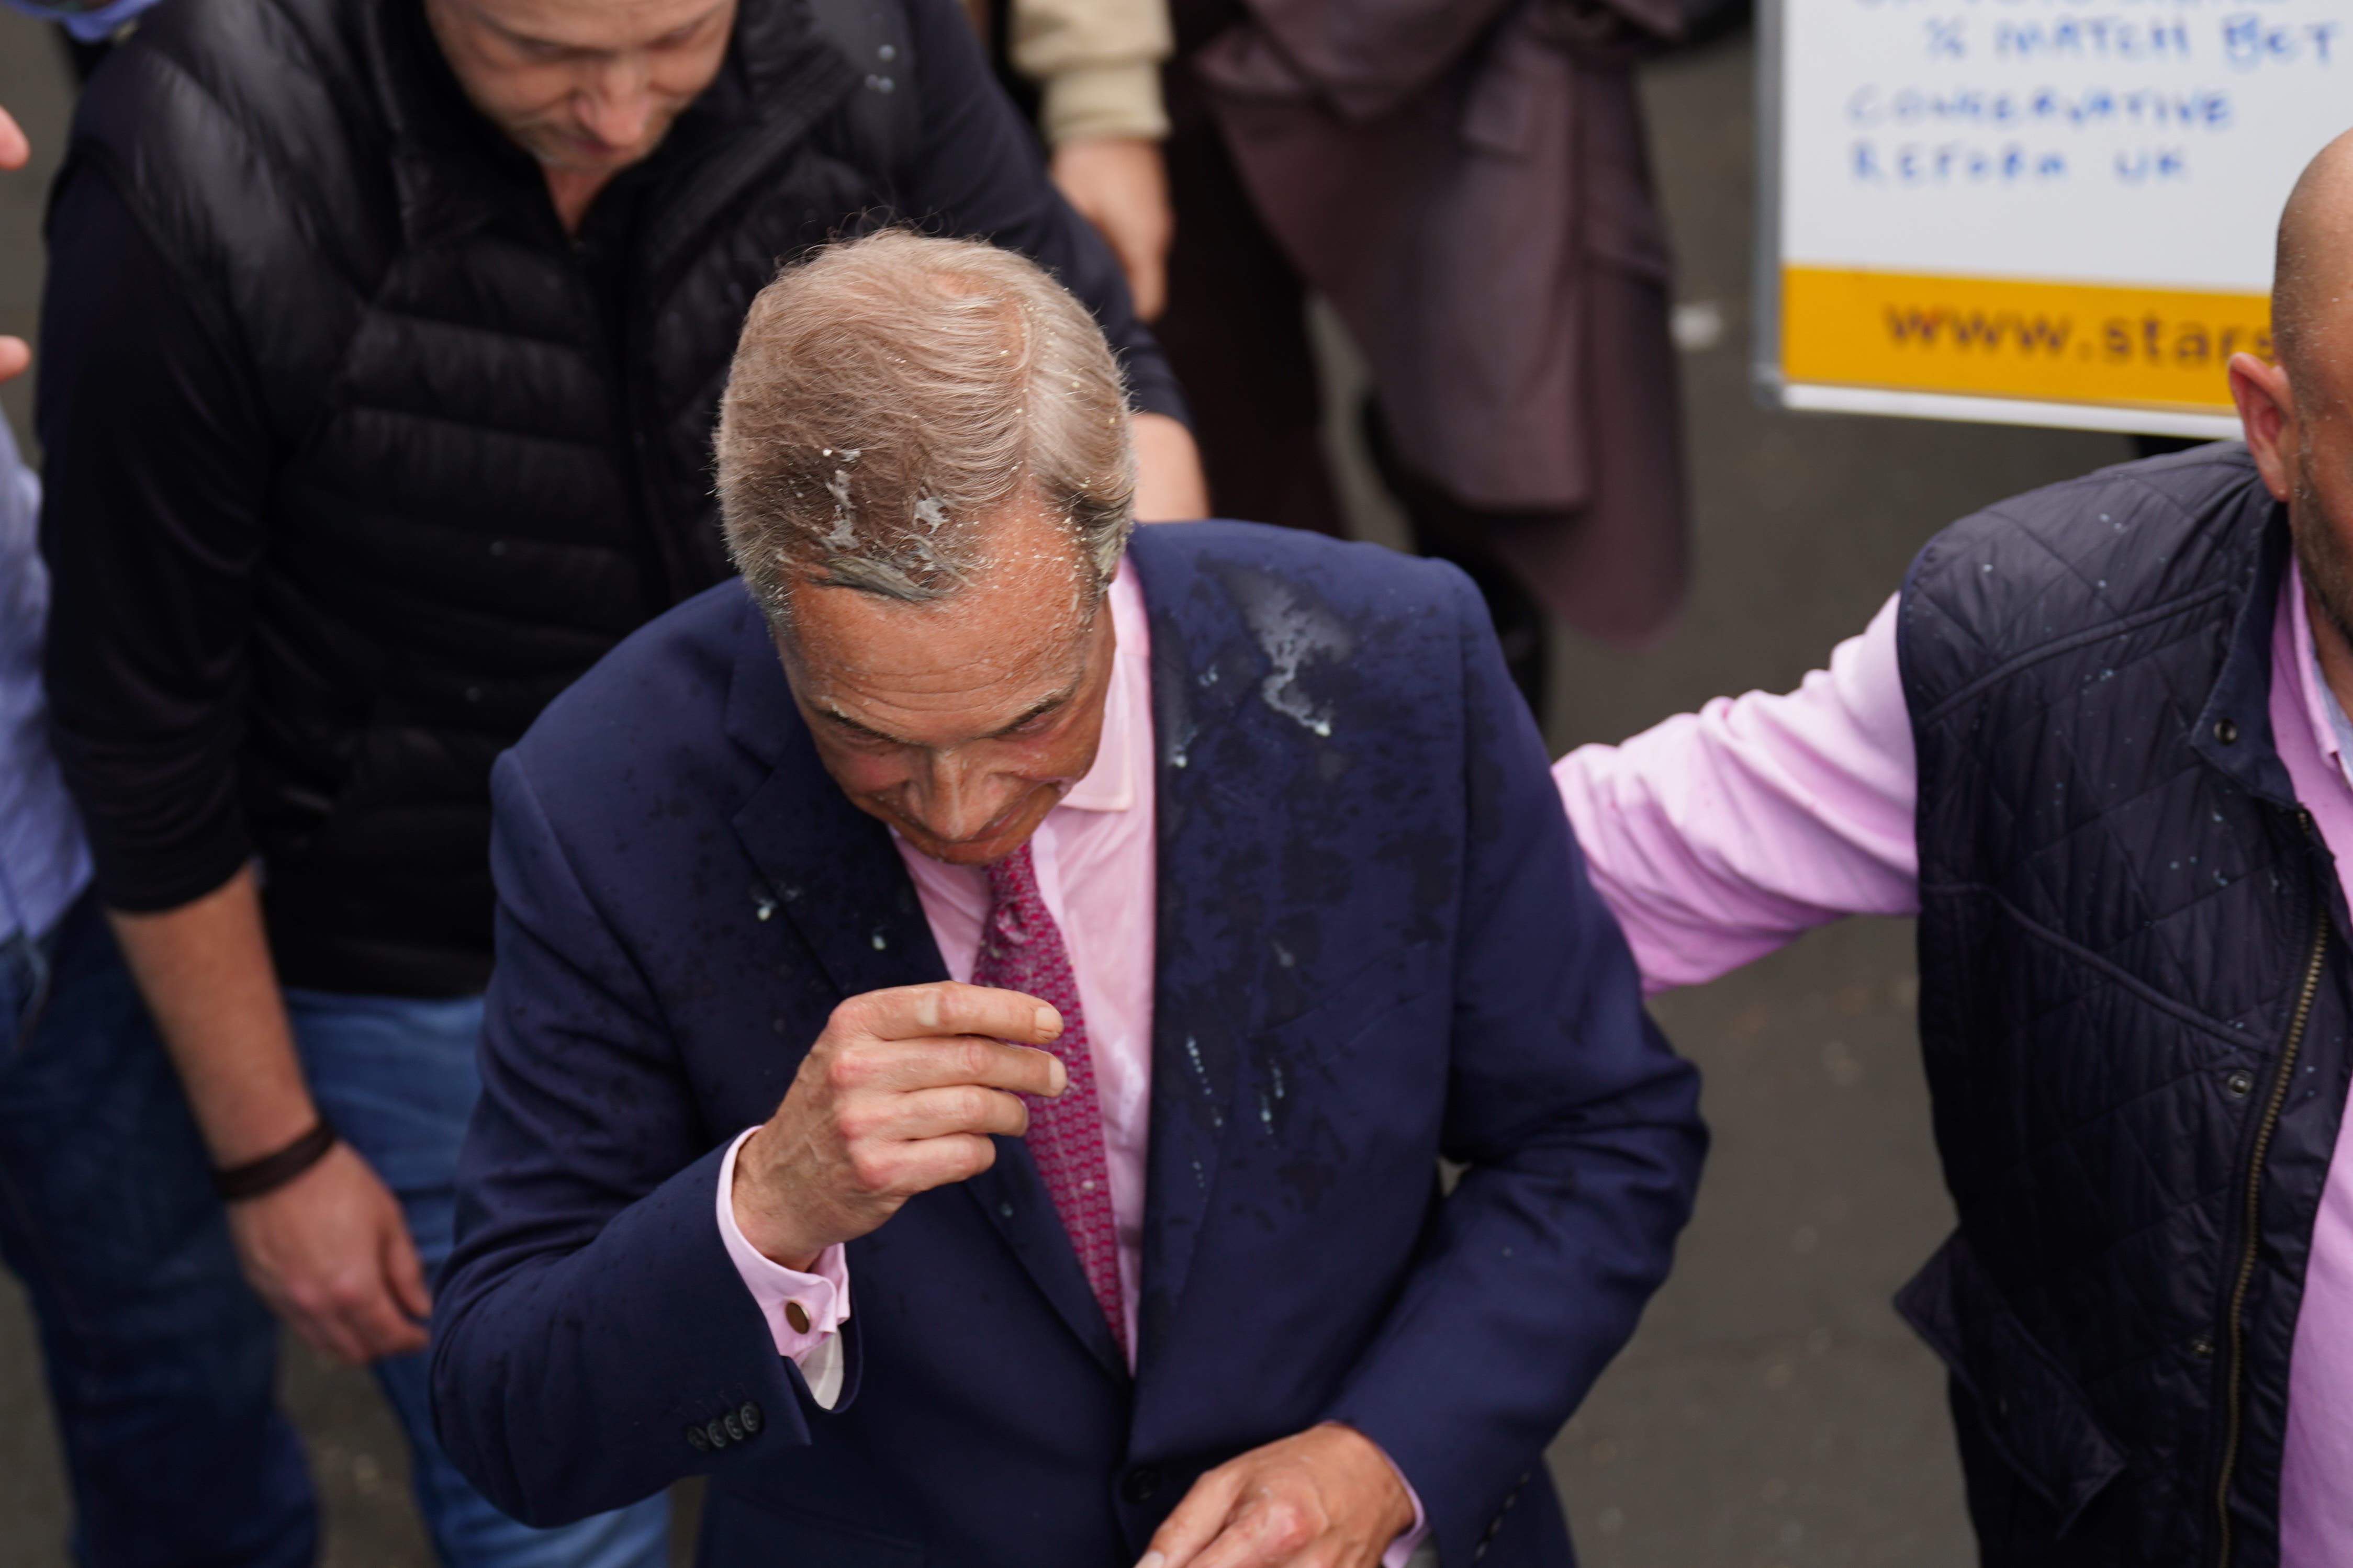 Leader of Reform UK Nigel Farage after a drink was thrown over him as he leaves the Moon and Starfish pub in Clacton